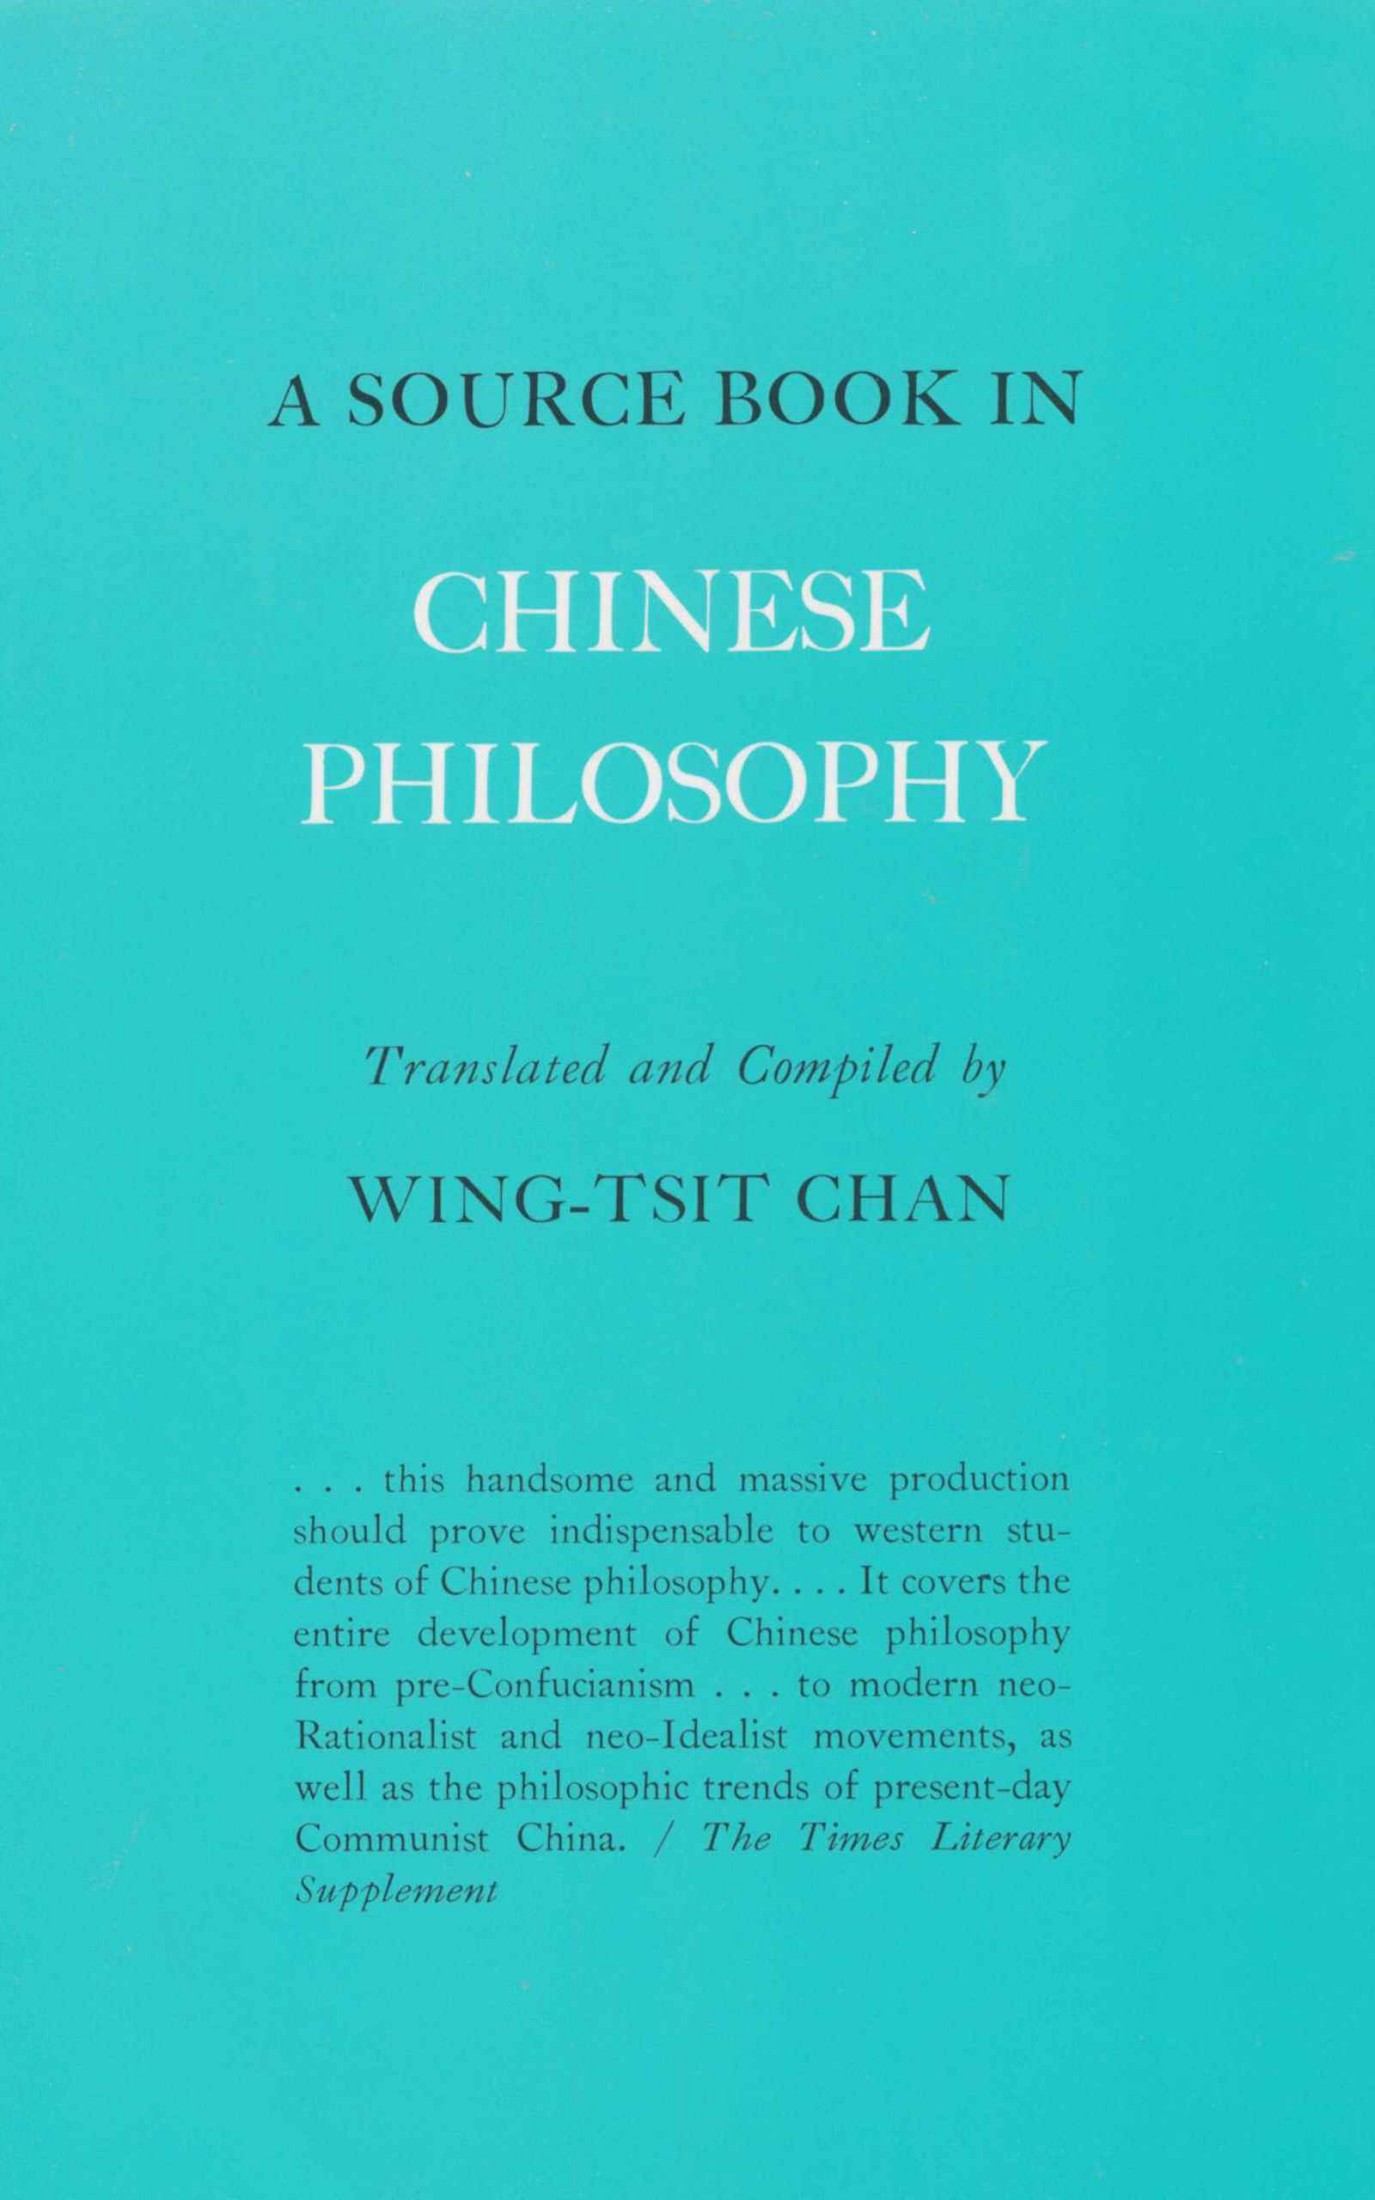 A Source Book in Chinese Philosophy (Princeton Paperbacks)